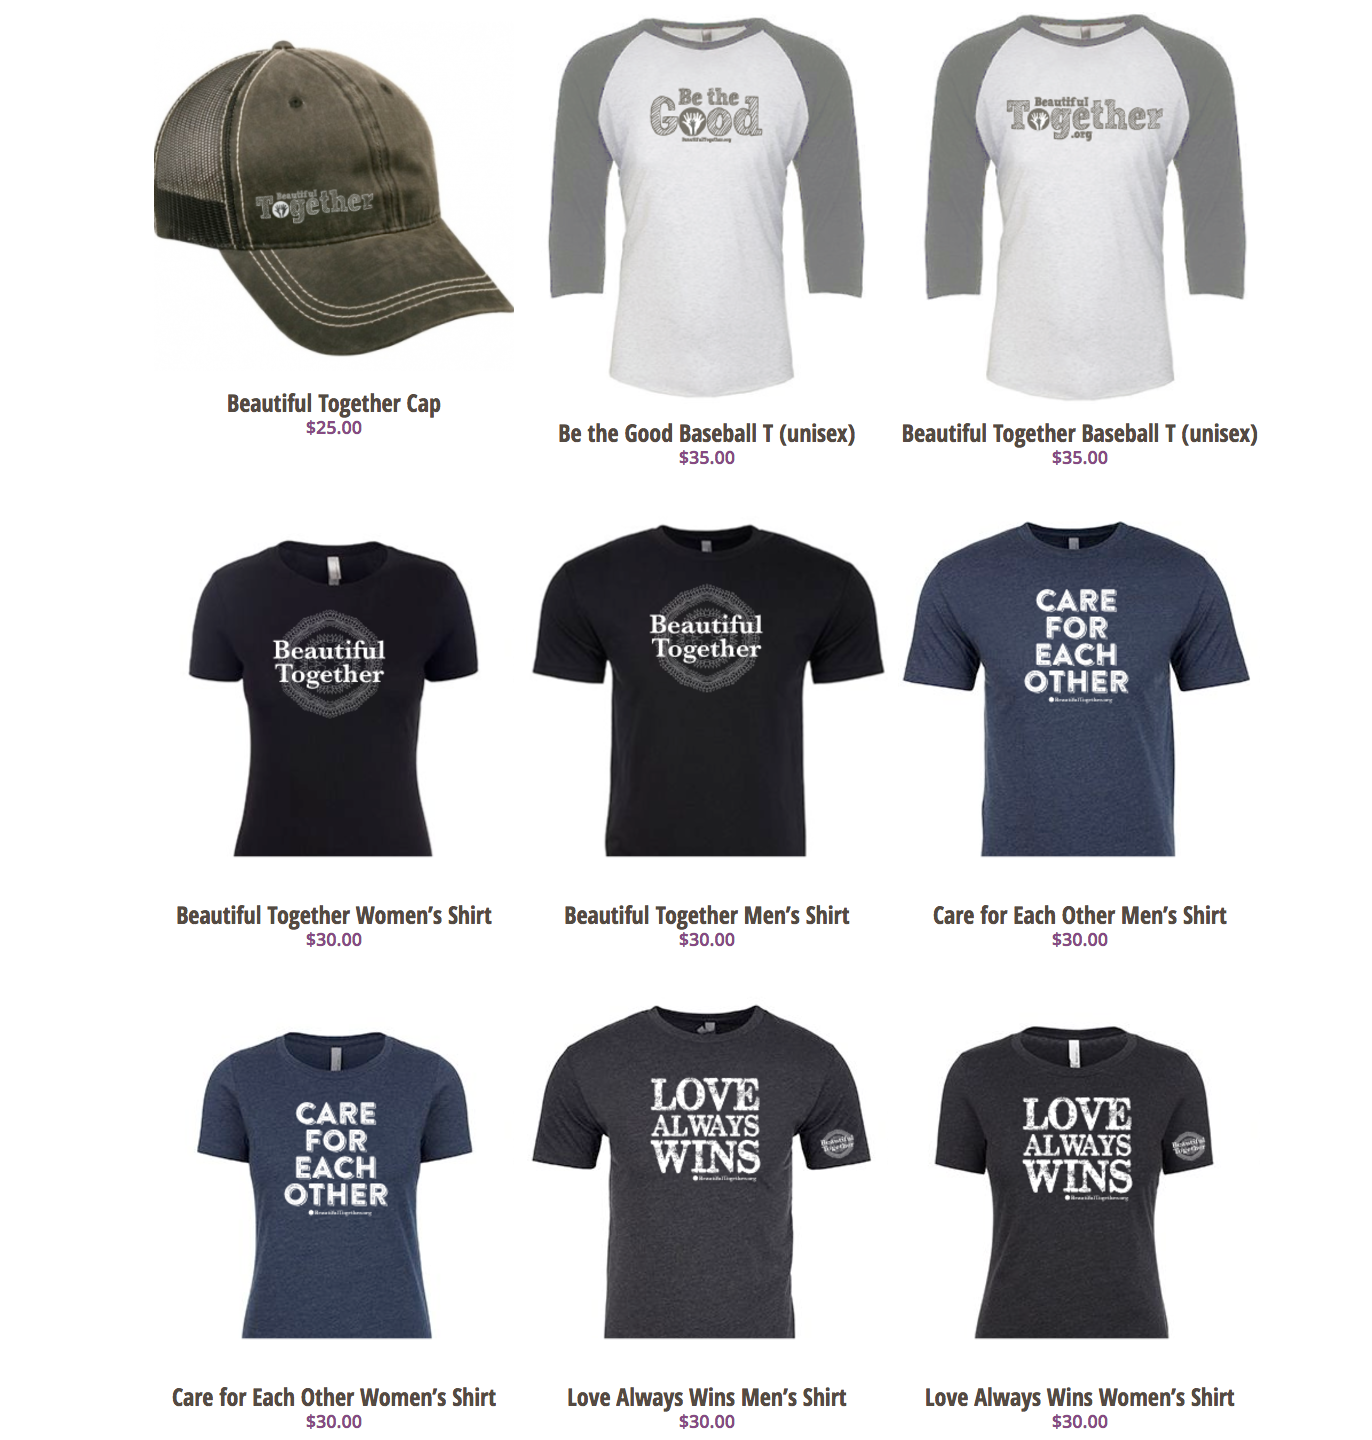 Beautiful Together, t-shirt, Aleppo Orphans, Be The Good, Love Always Wins, Gear, Tamara Lackey